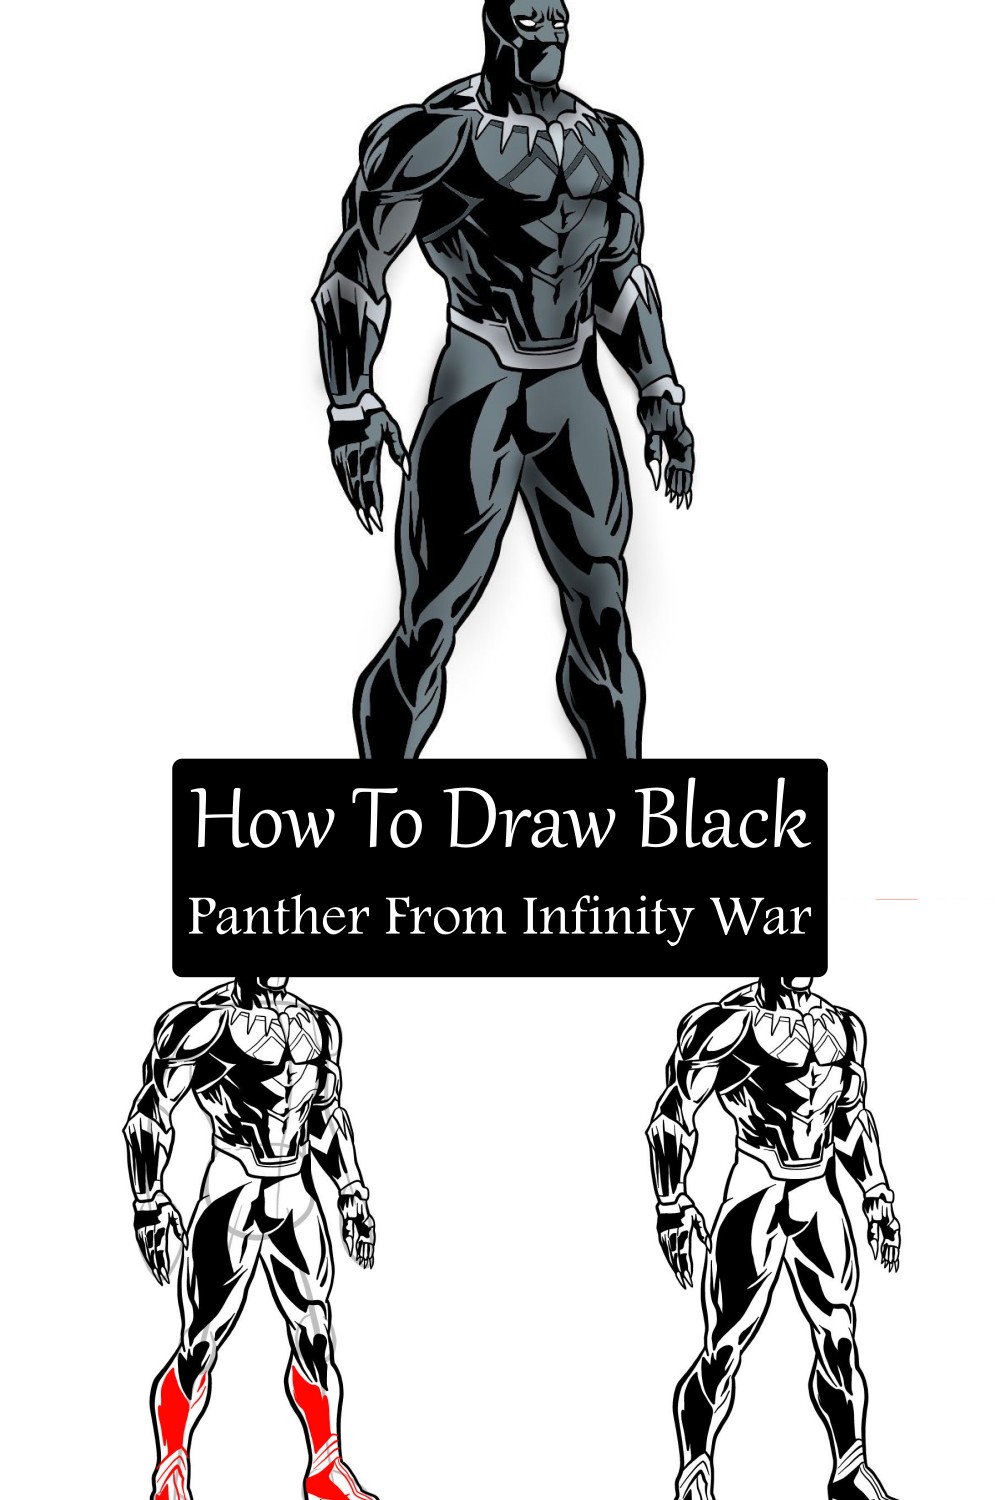 How To Draw Black Panther From Infinity War